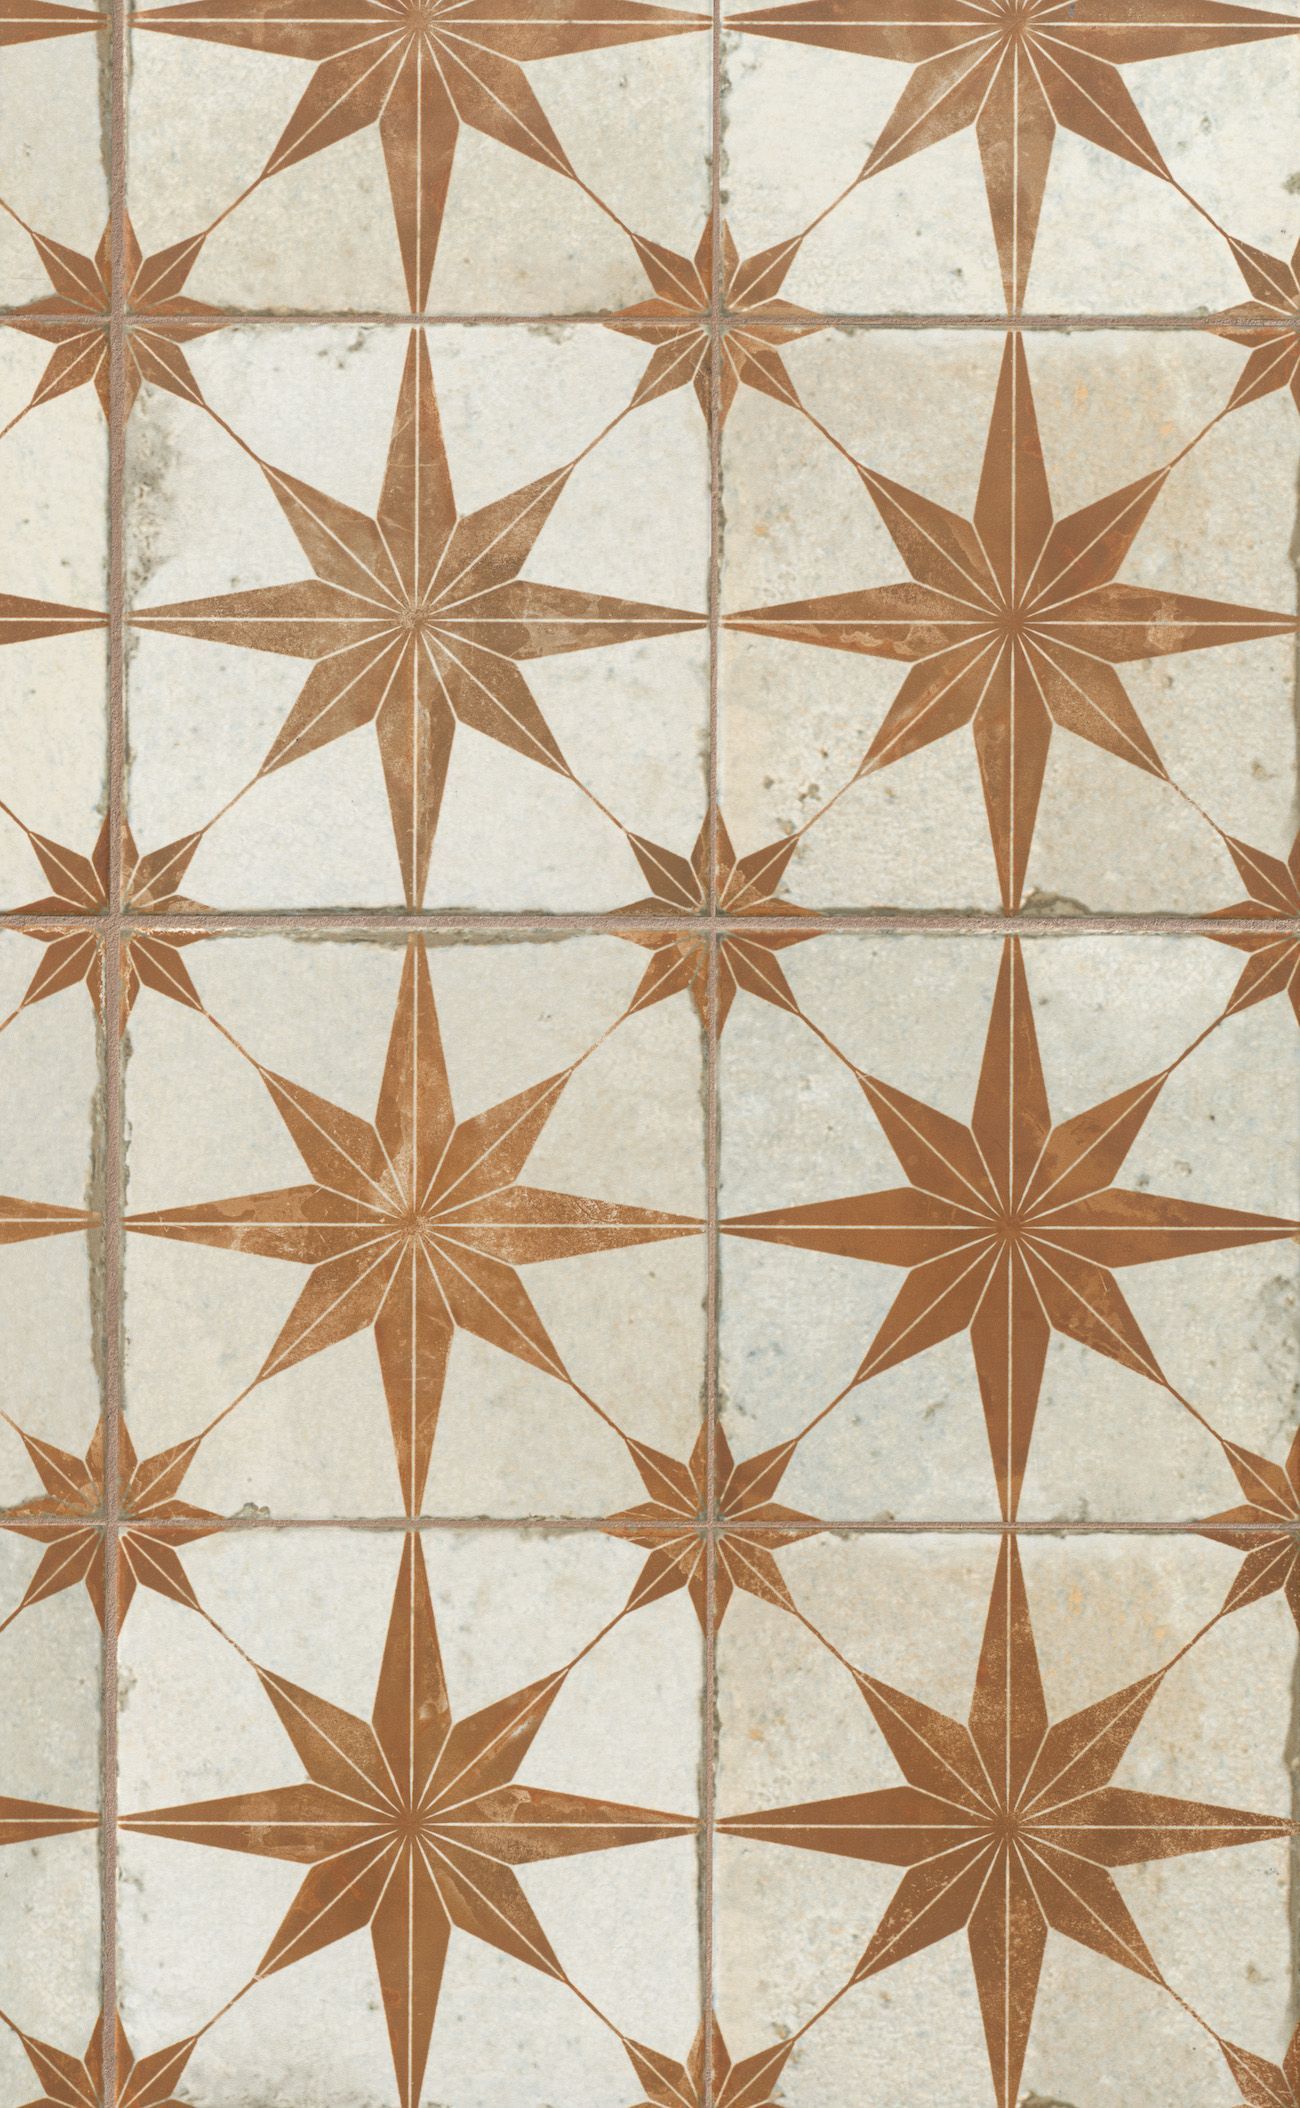 Star Oxide Ceramic Wall and Floor Tile - 18 x 18 in.